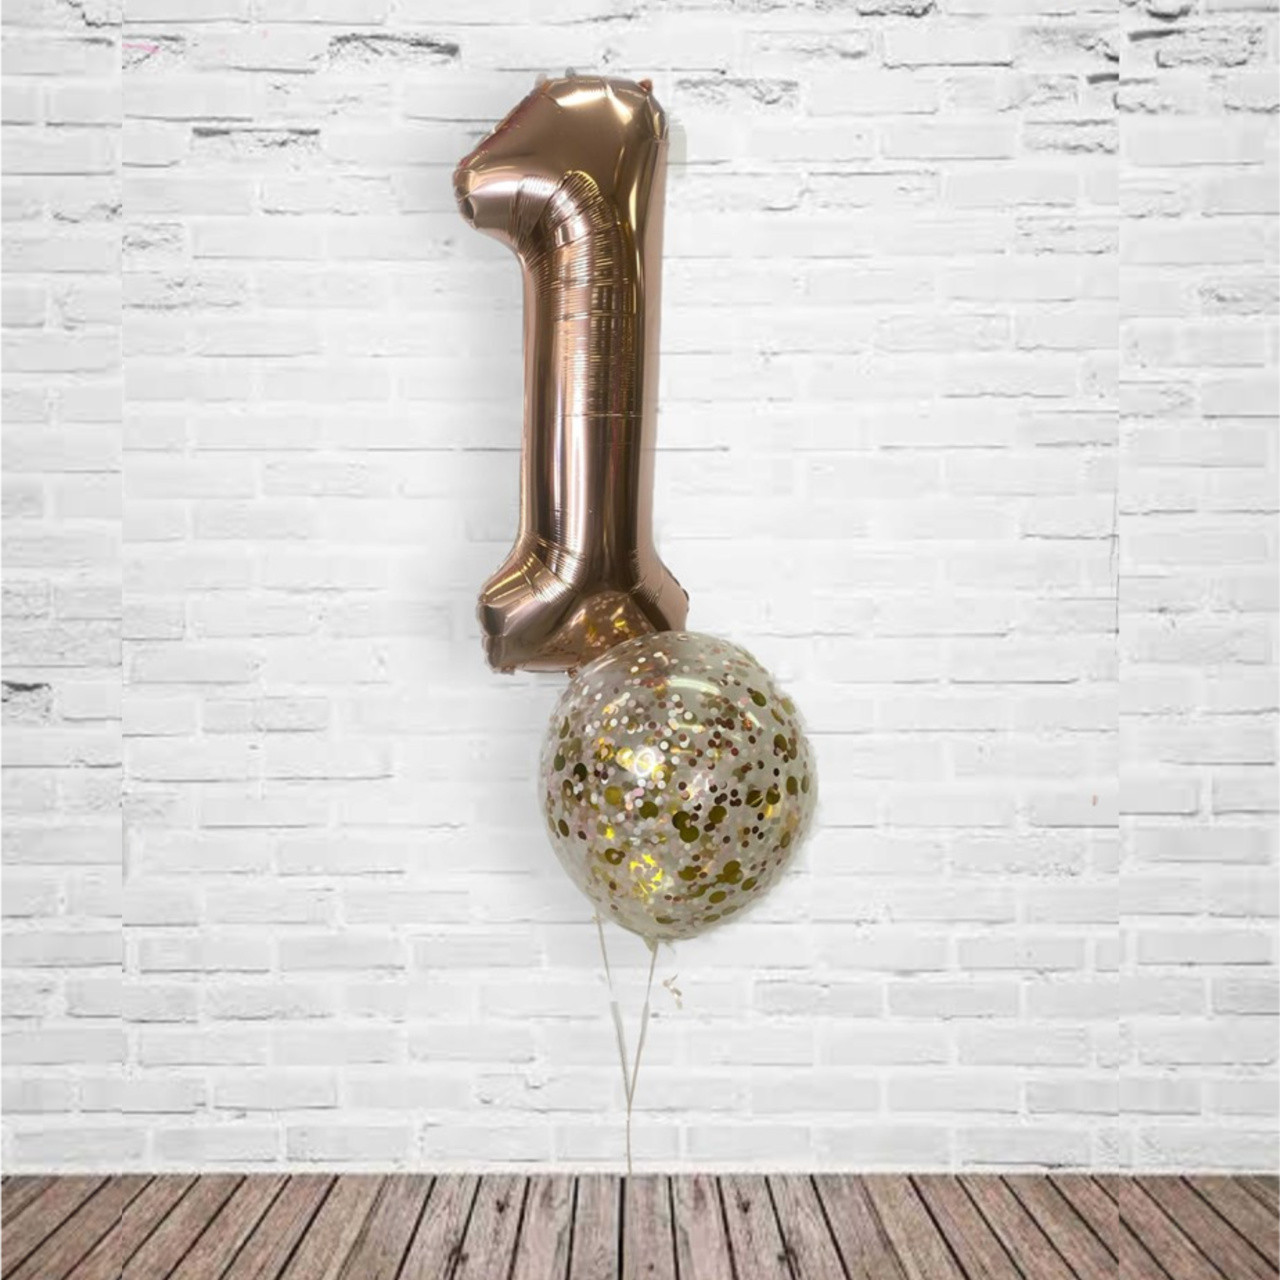 Foil Number or letter with 40cm Confetti choice incl hi float to last weight and ribbon